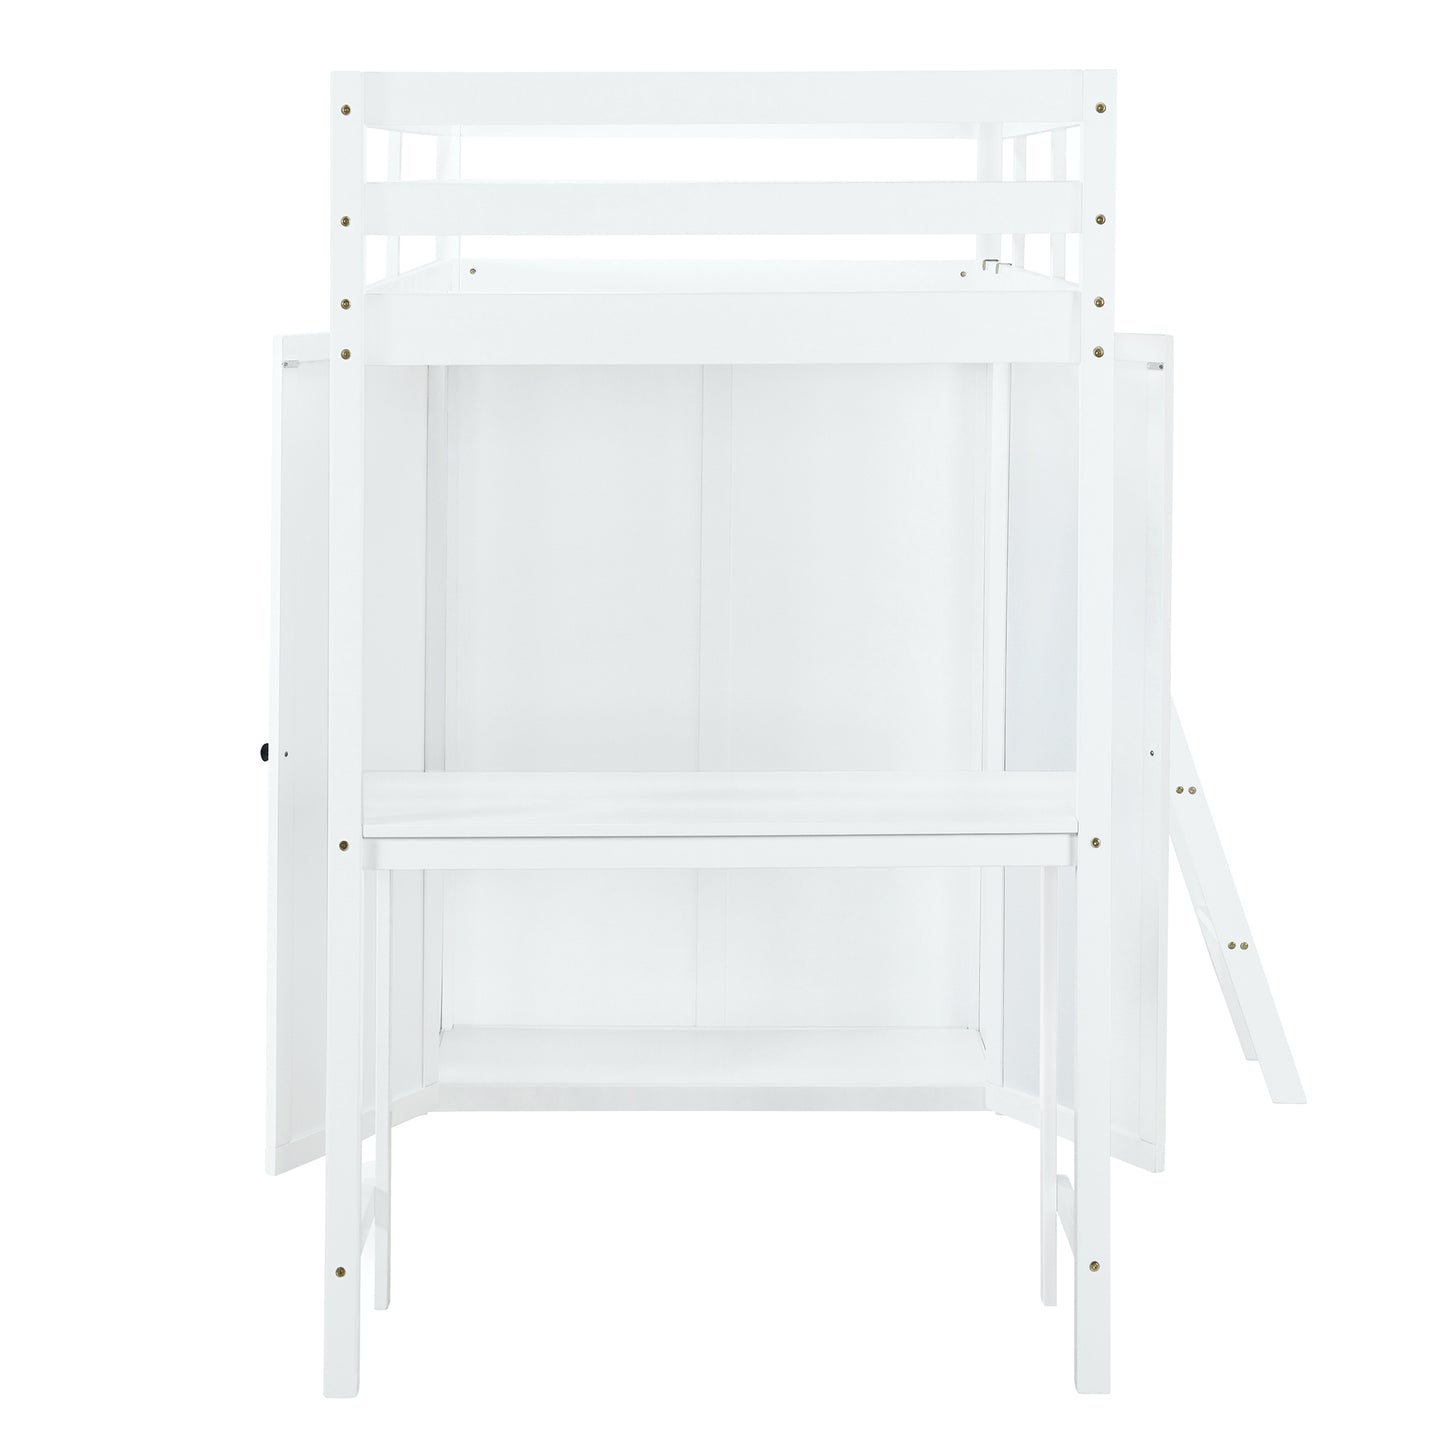 Twin Size Loft Bed with Wardrobe and Desk, White